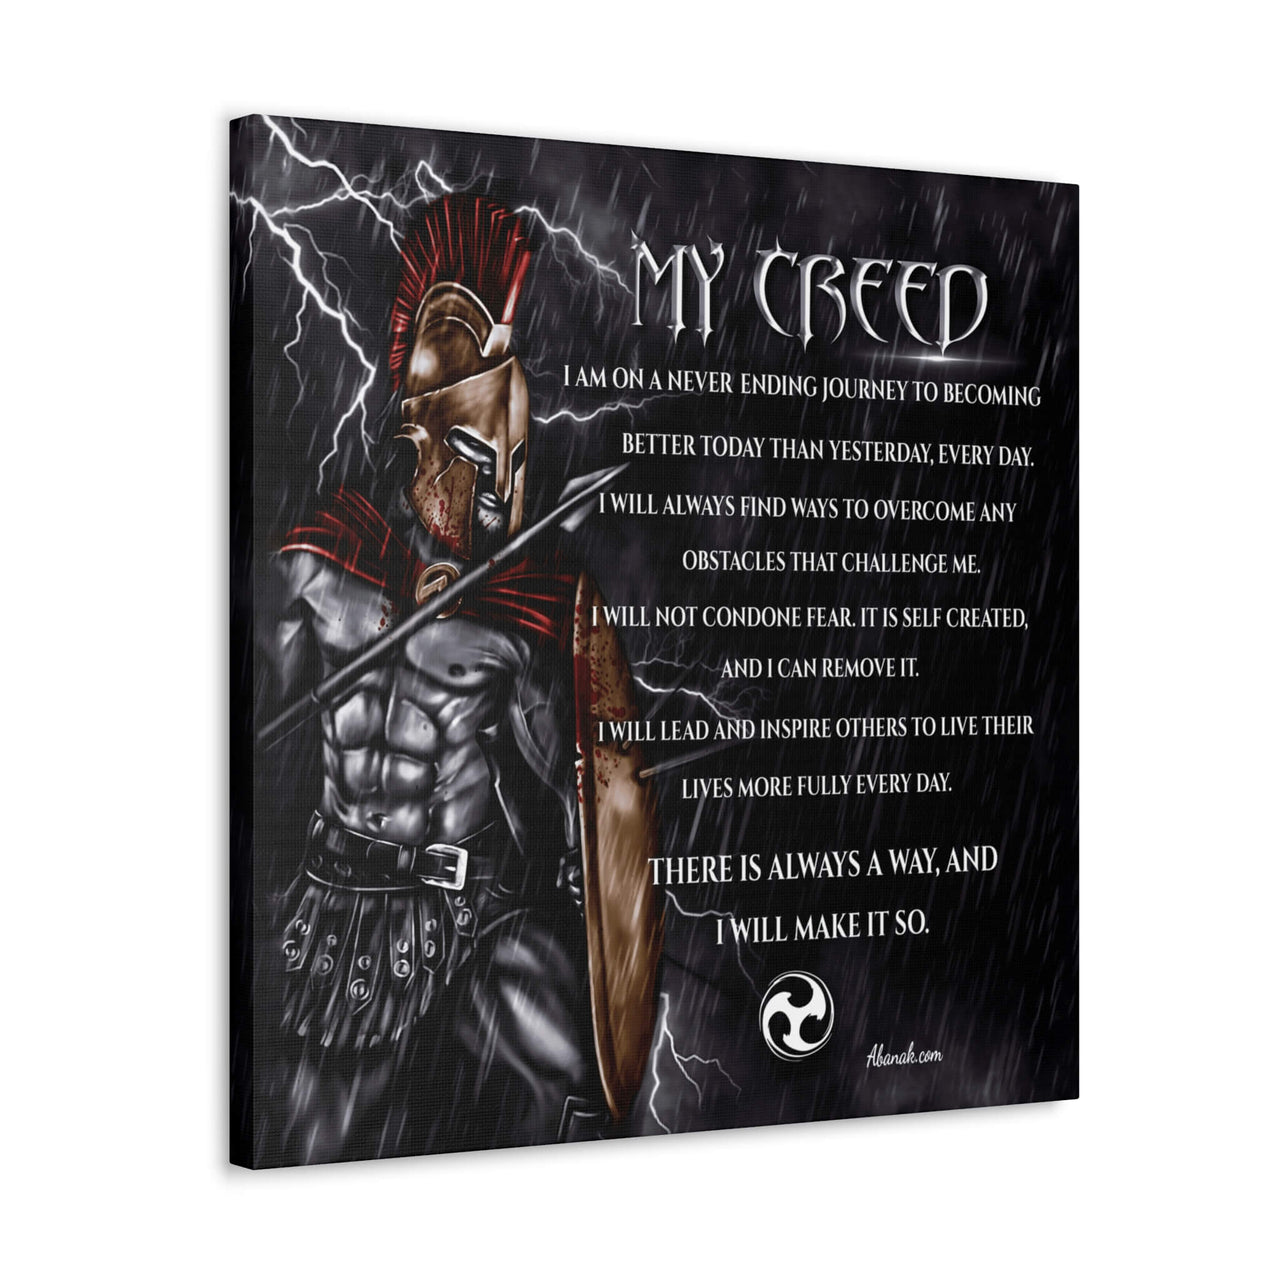 My Creed - There Is Always A Way And I Will Make It So - Spartan Warrior - Gallery Wrapped Canvas Print